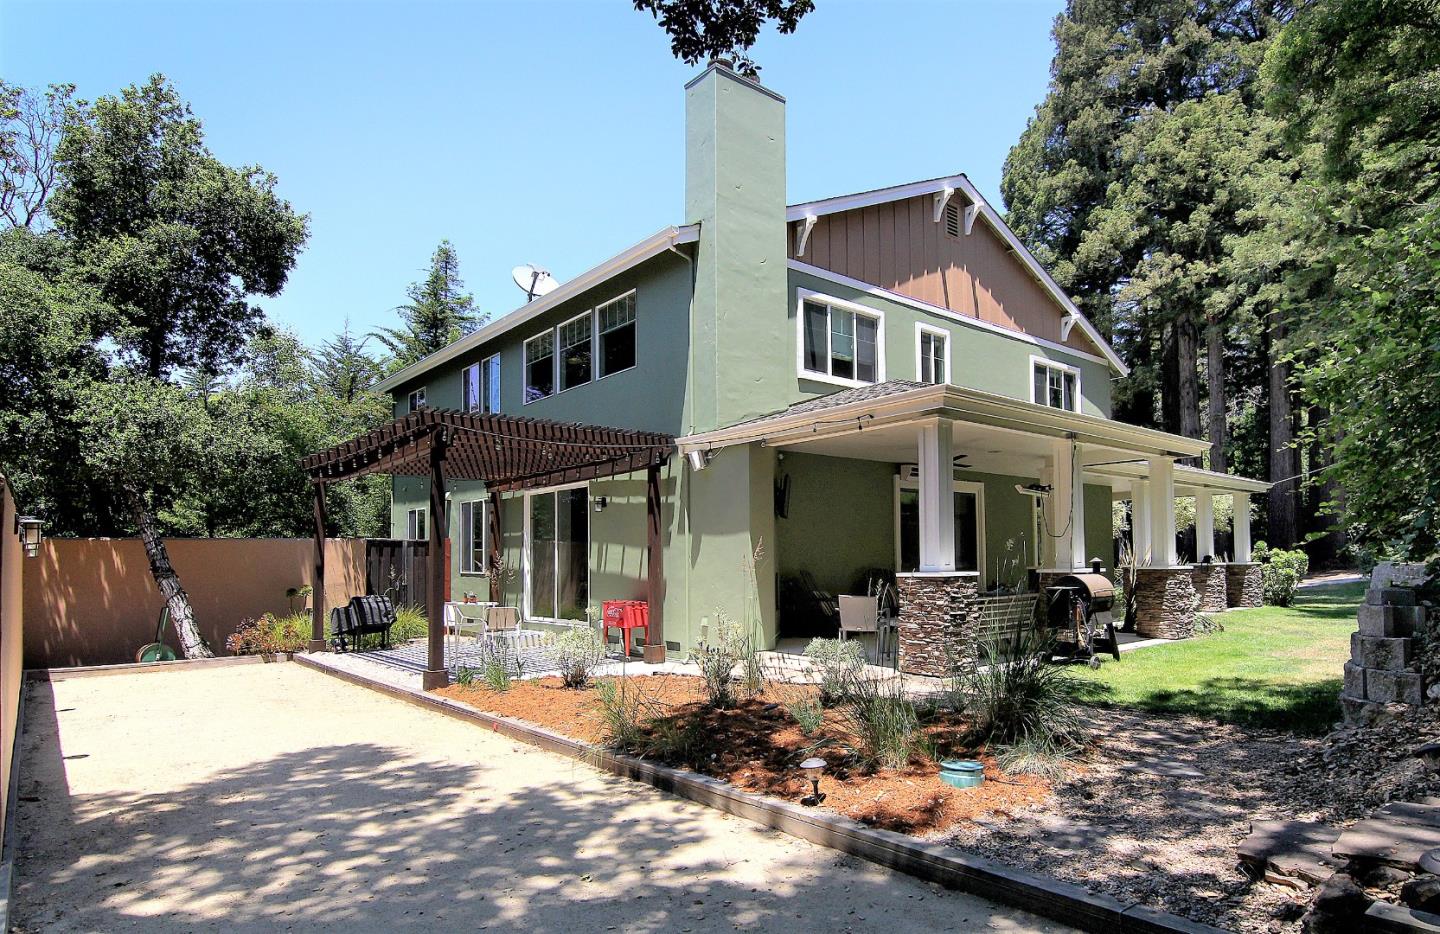 33 Polo Heights Rd, Scotts Valley, CA 95066